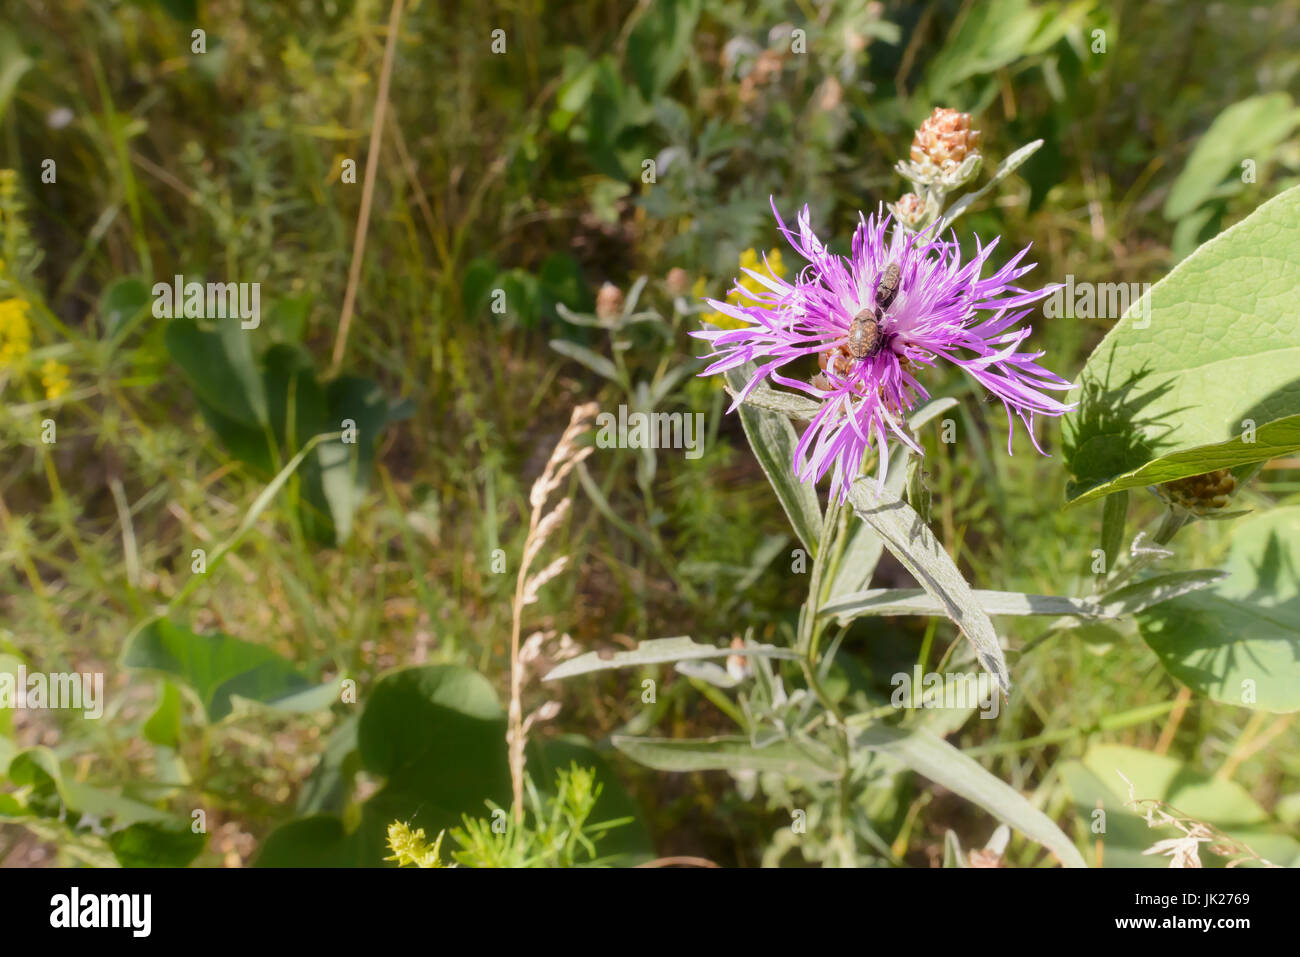 Centaurea phrygia L. subspecies pseudophrygia flower, also known as wig knapweed, growing in the meadow in Kiev, Ukraine, with two weevils living on i Stock Photo